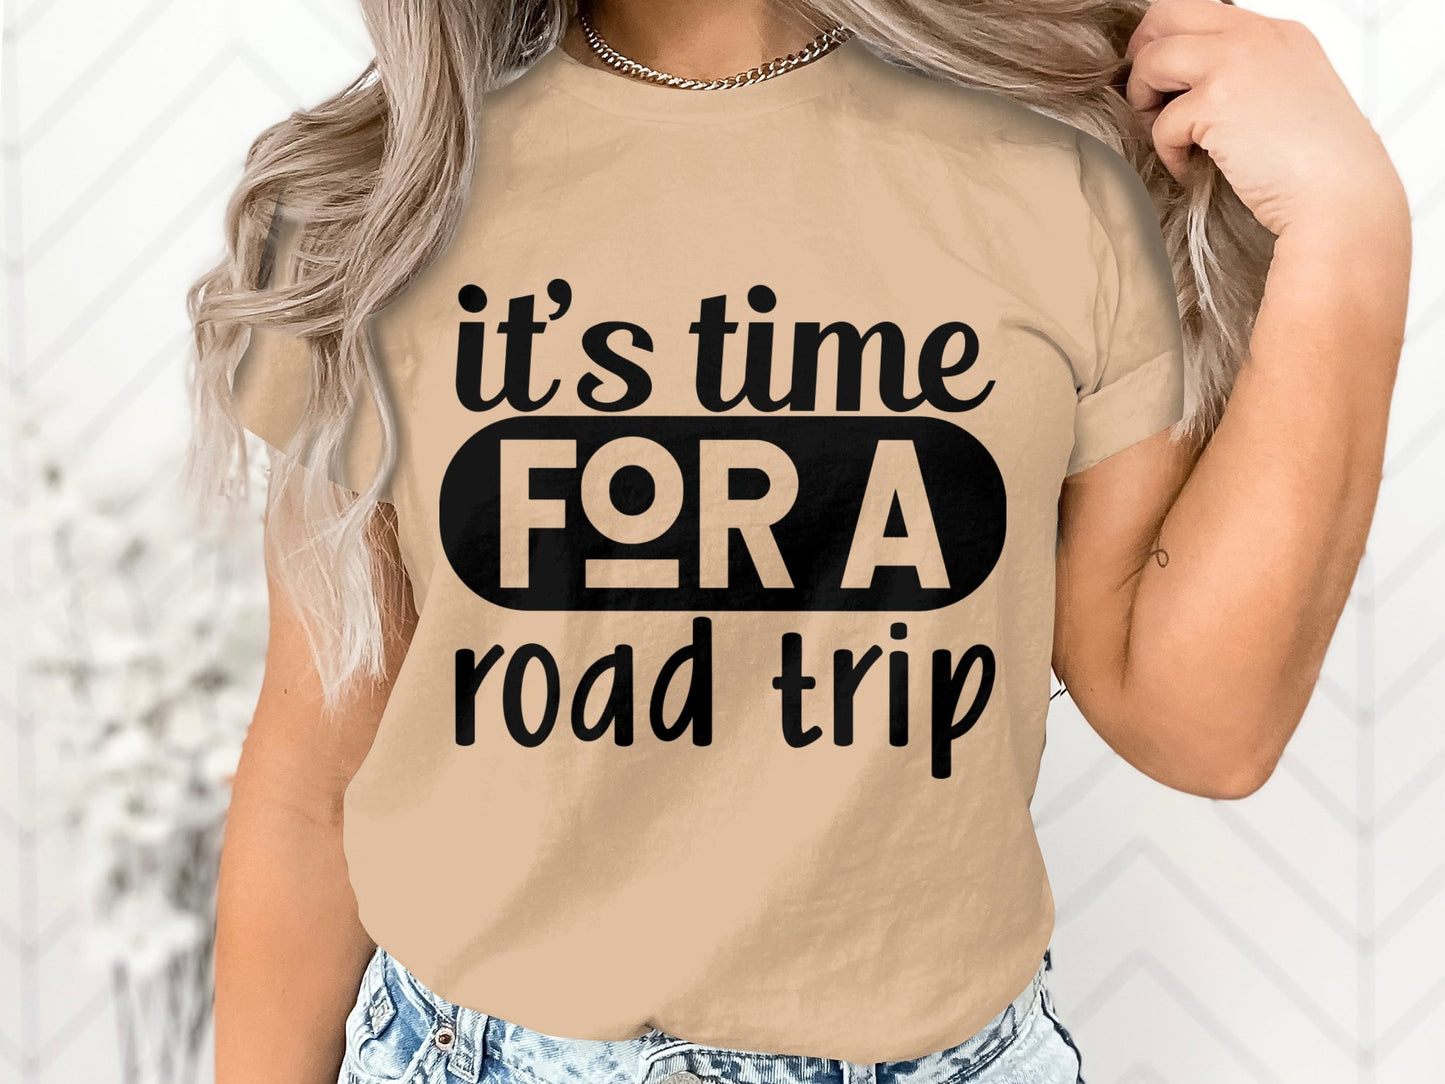 It's time for a road trip tshirt